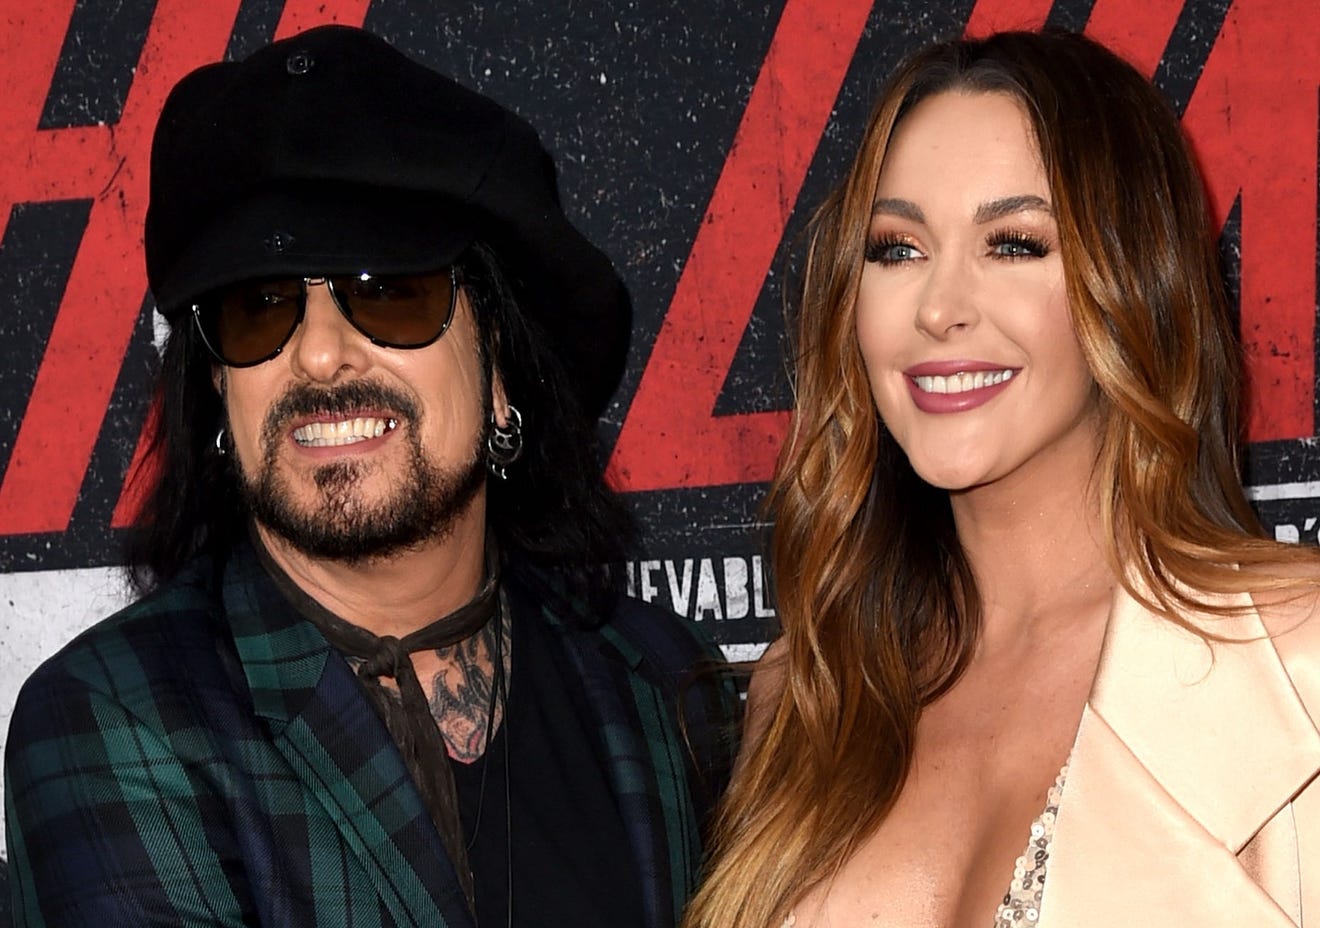 Motley Crues Nikki Sixx And Wife Courtney Welcome Daughter Ruby